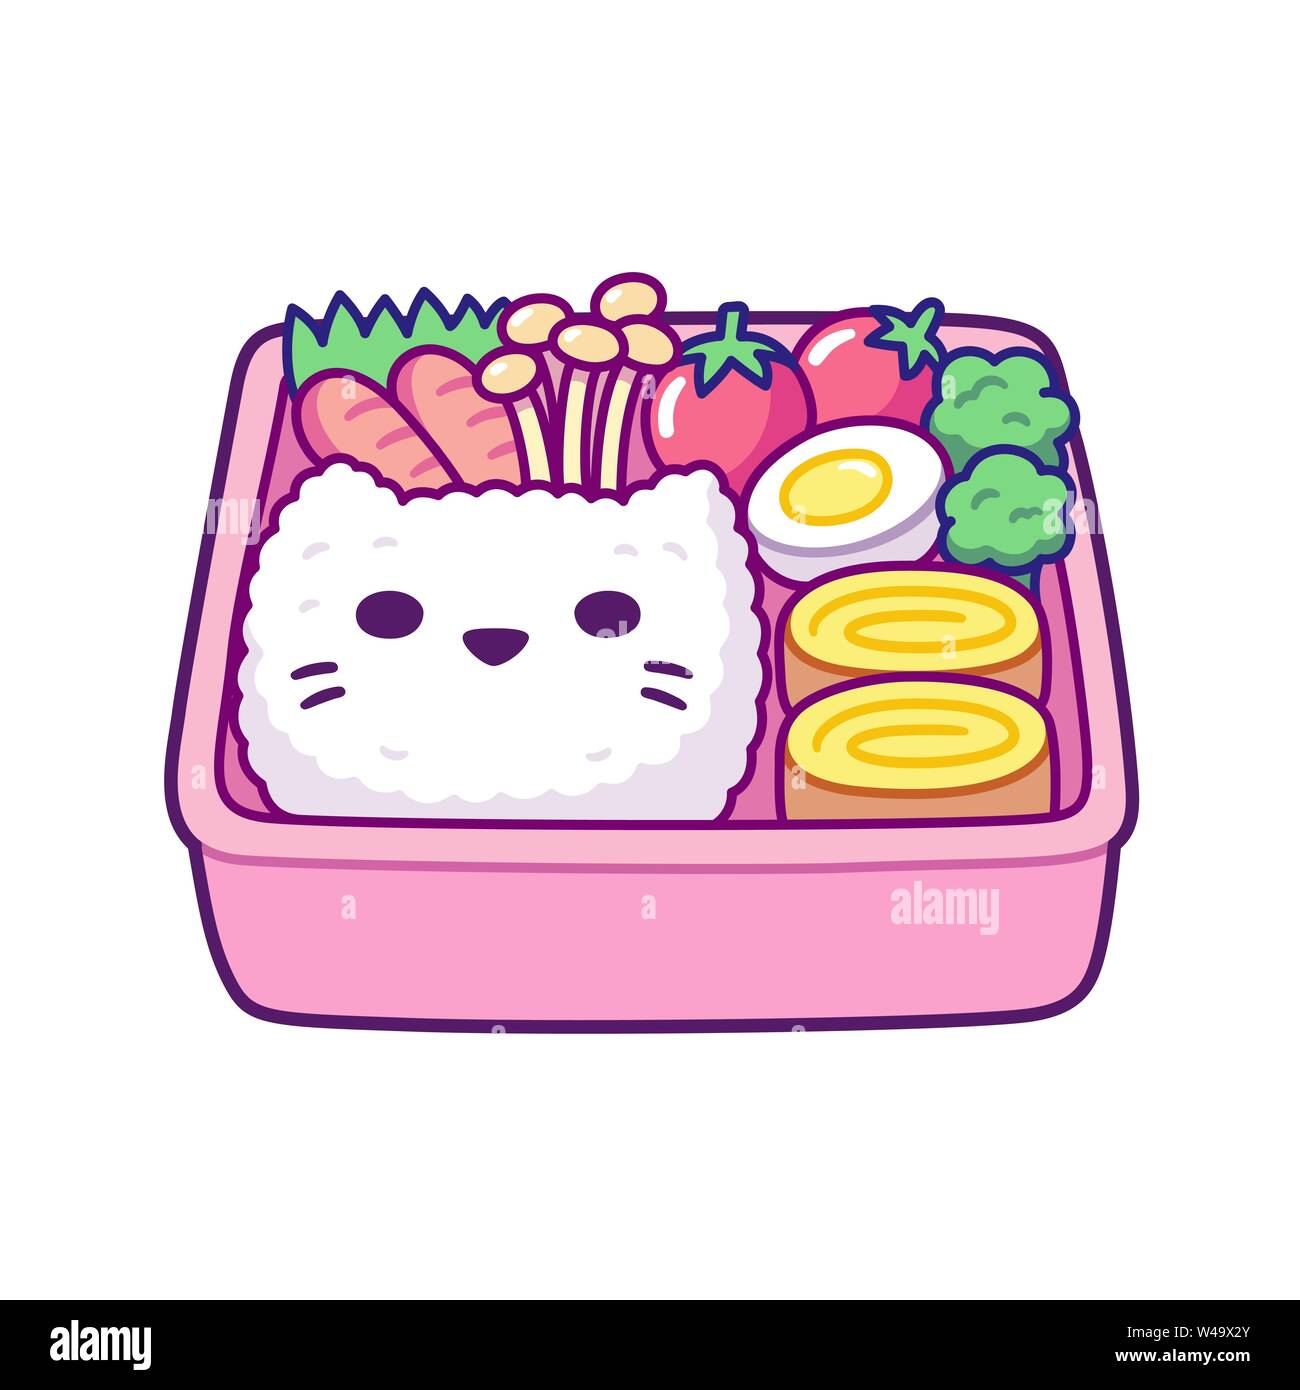 https://c8.alamy.com/comp/W49X2Y/cute-cartoon-bento-box-with-cat-face-shaped-rice-egg-rolls-mushrooms-and-vegetables-traditional-japanese-lunchbox-for-kids-simple-hand-drawn-vecto-W49X2Y.jpg